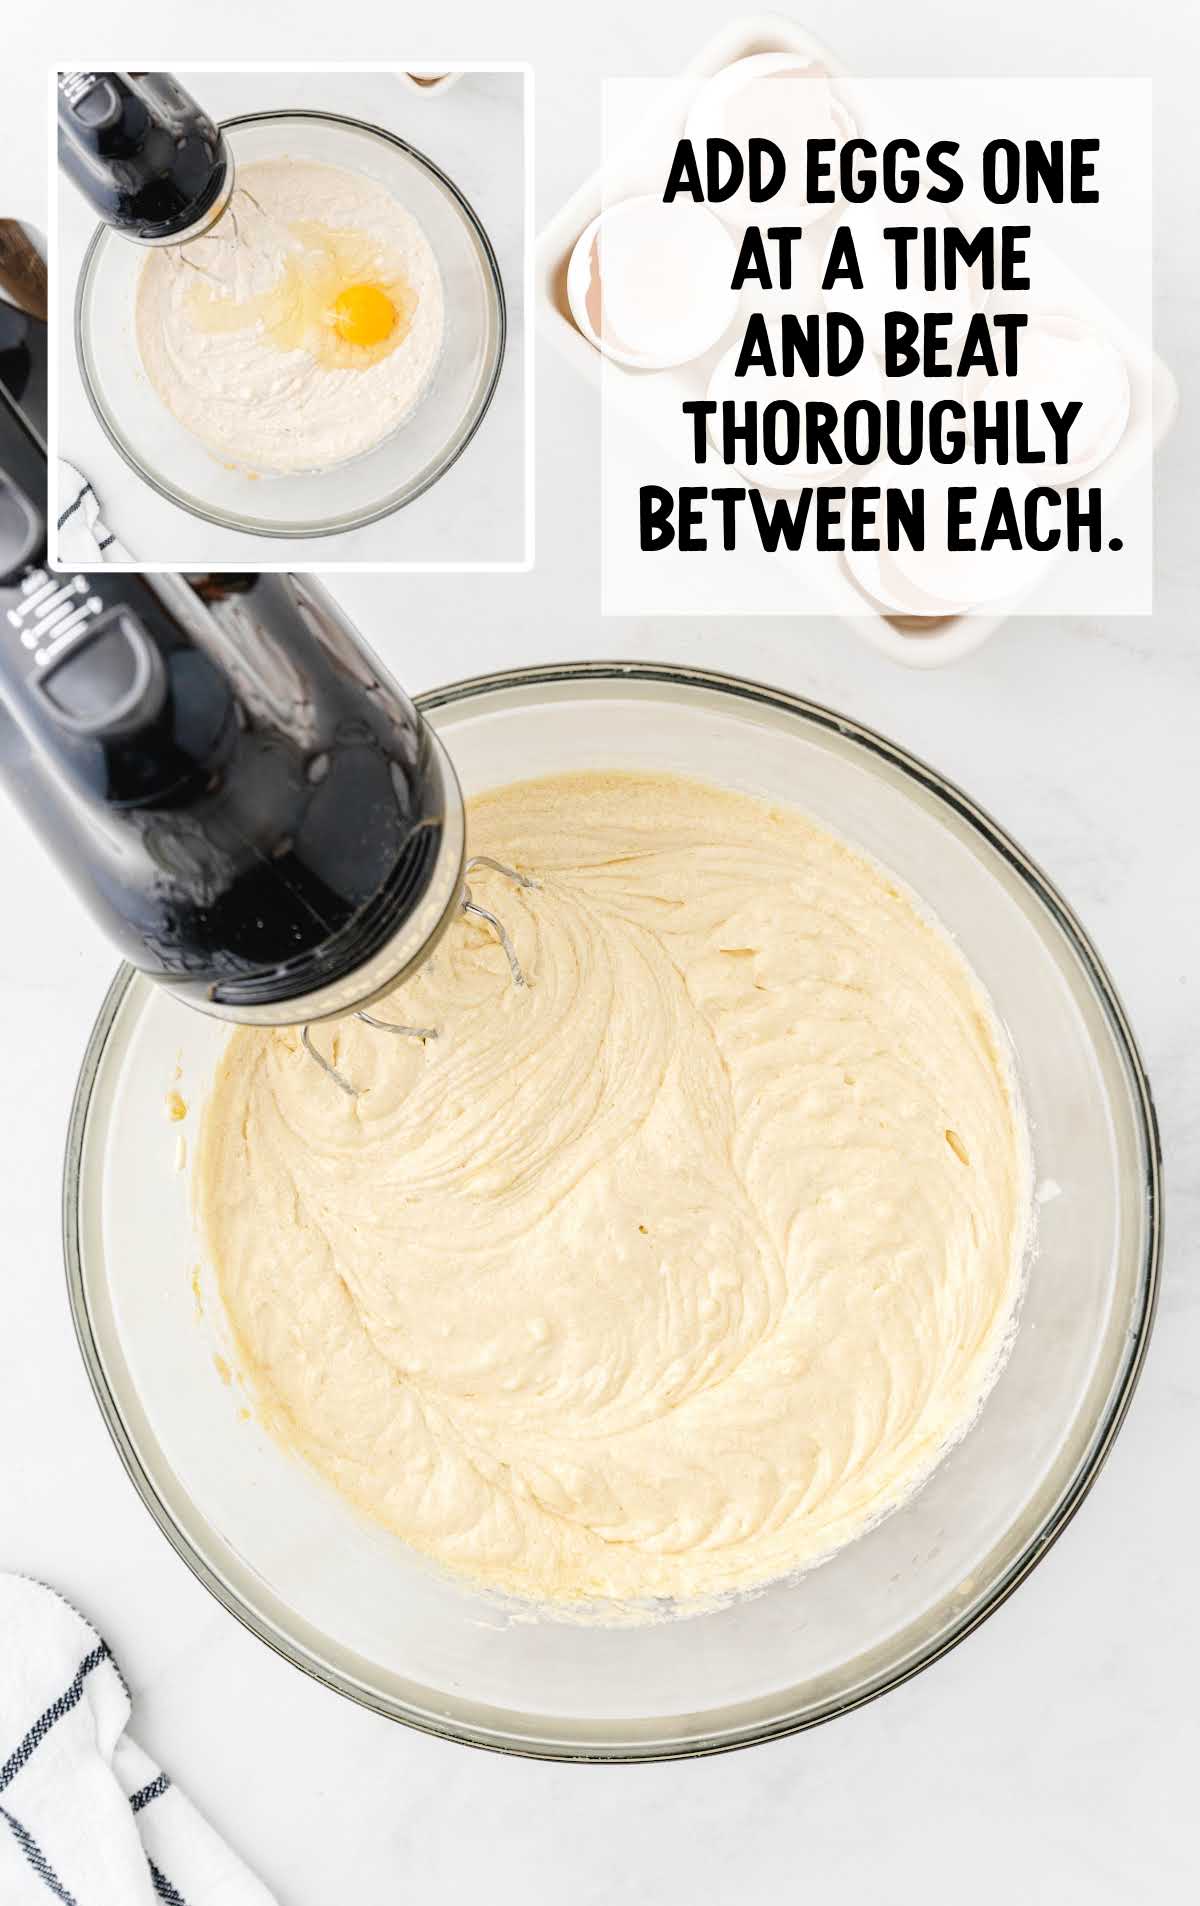 eggs blended into the cupcake batter mixture